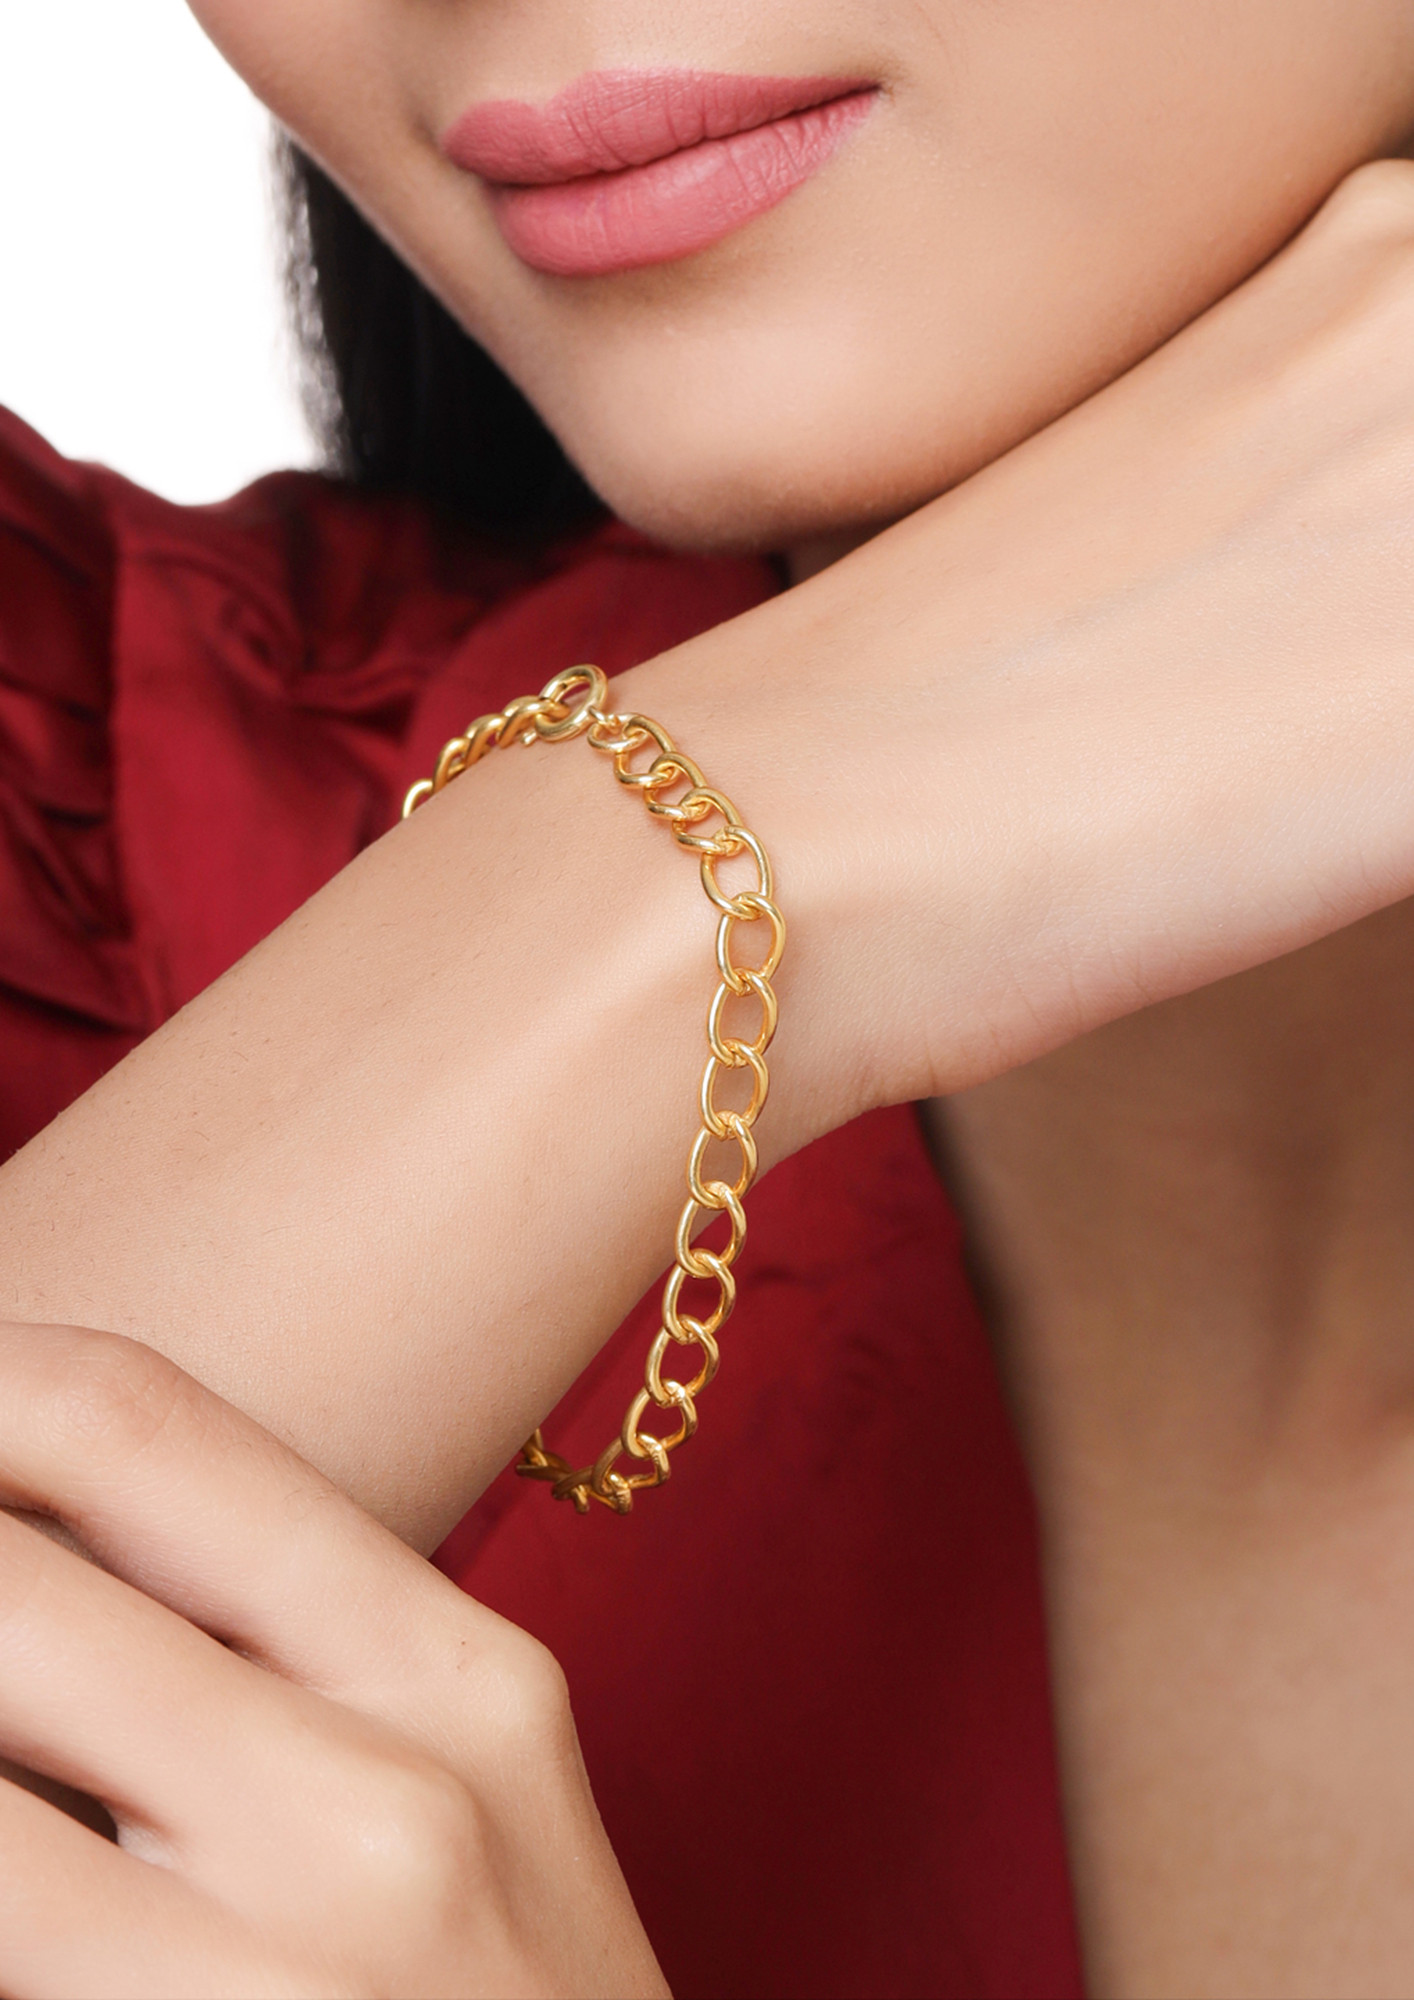 Buy Flat Rope Chain Bracelet / 14k Solid Gold Rope Chain 7 Mm / Twisted 14k Chain  Bracelet/ Wide Rope Gold Chain / Diamond Cut Rope Bracelet Online in India  - Etsy